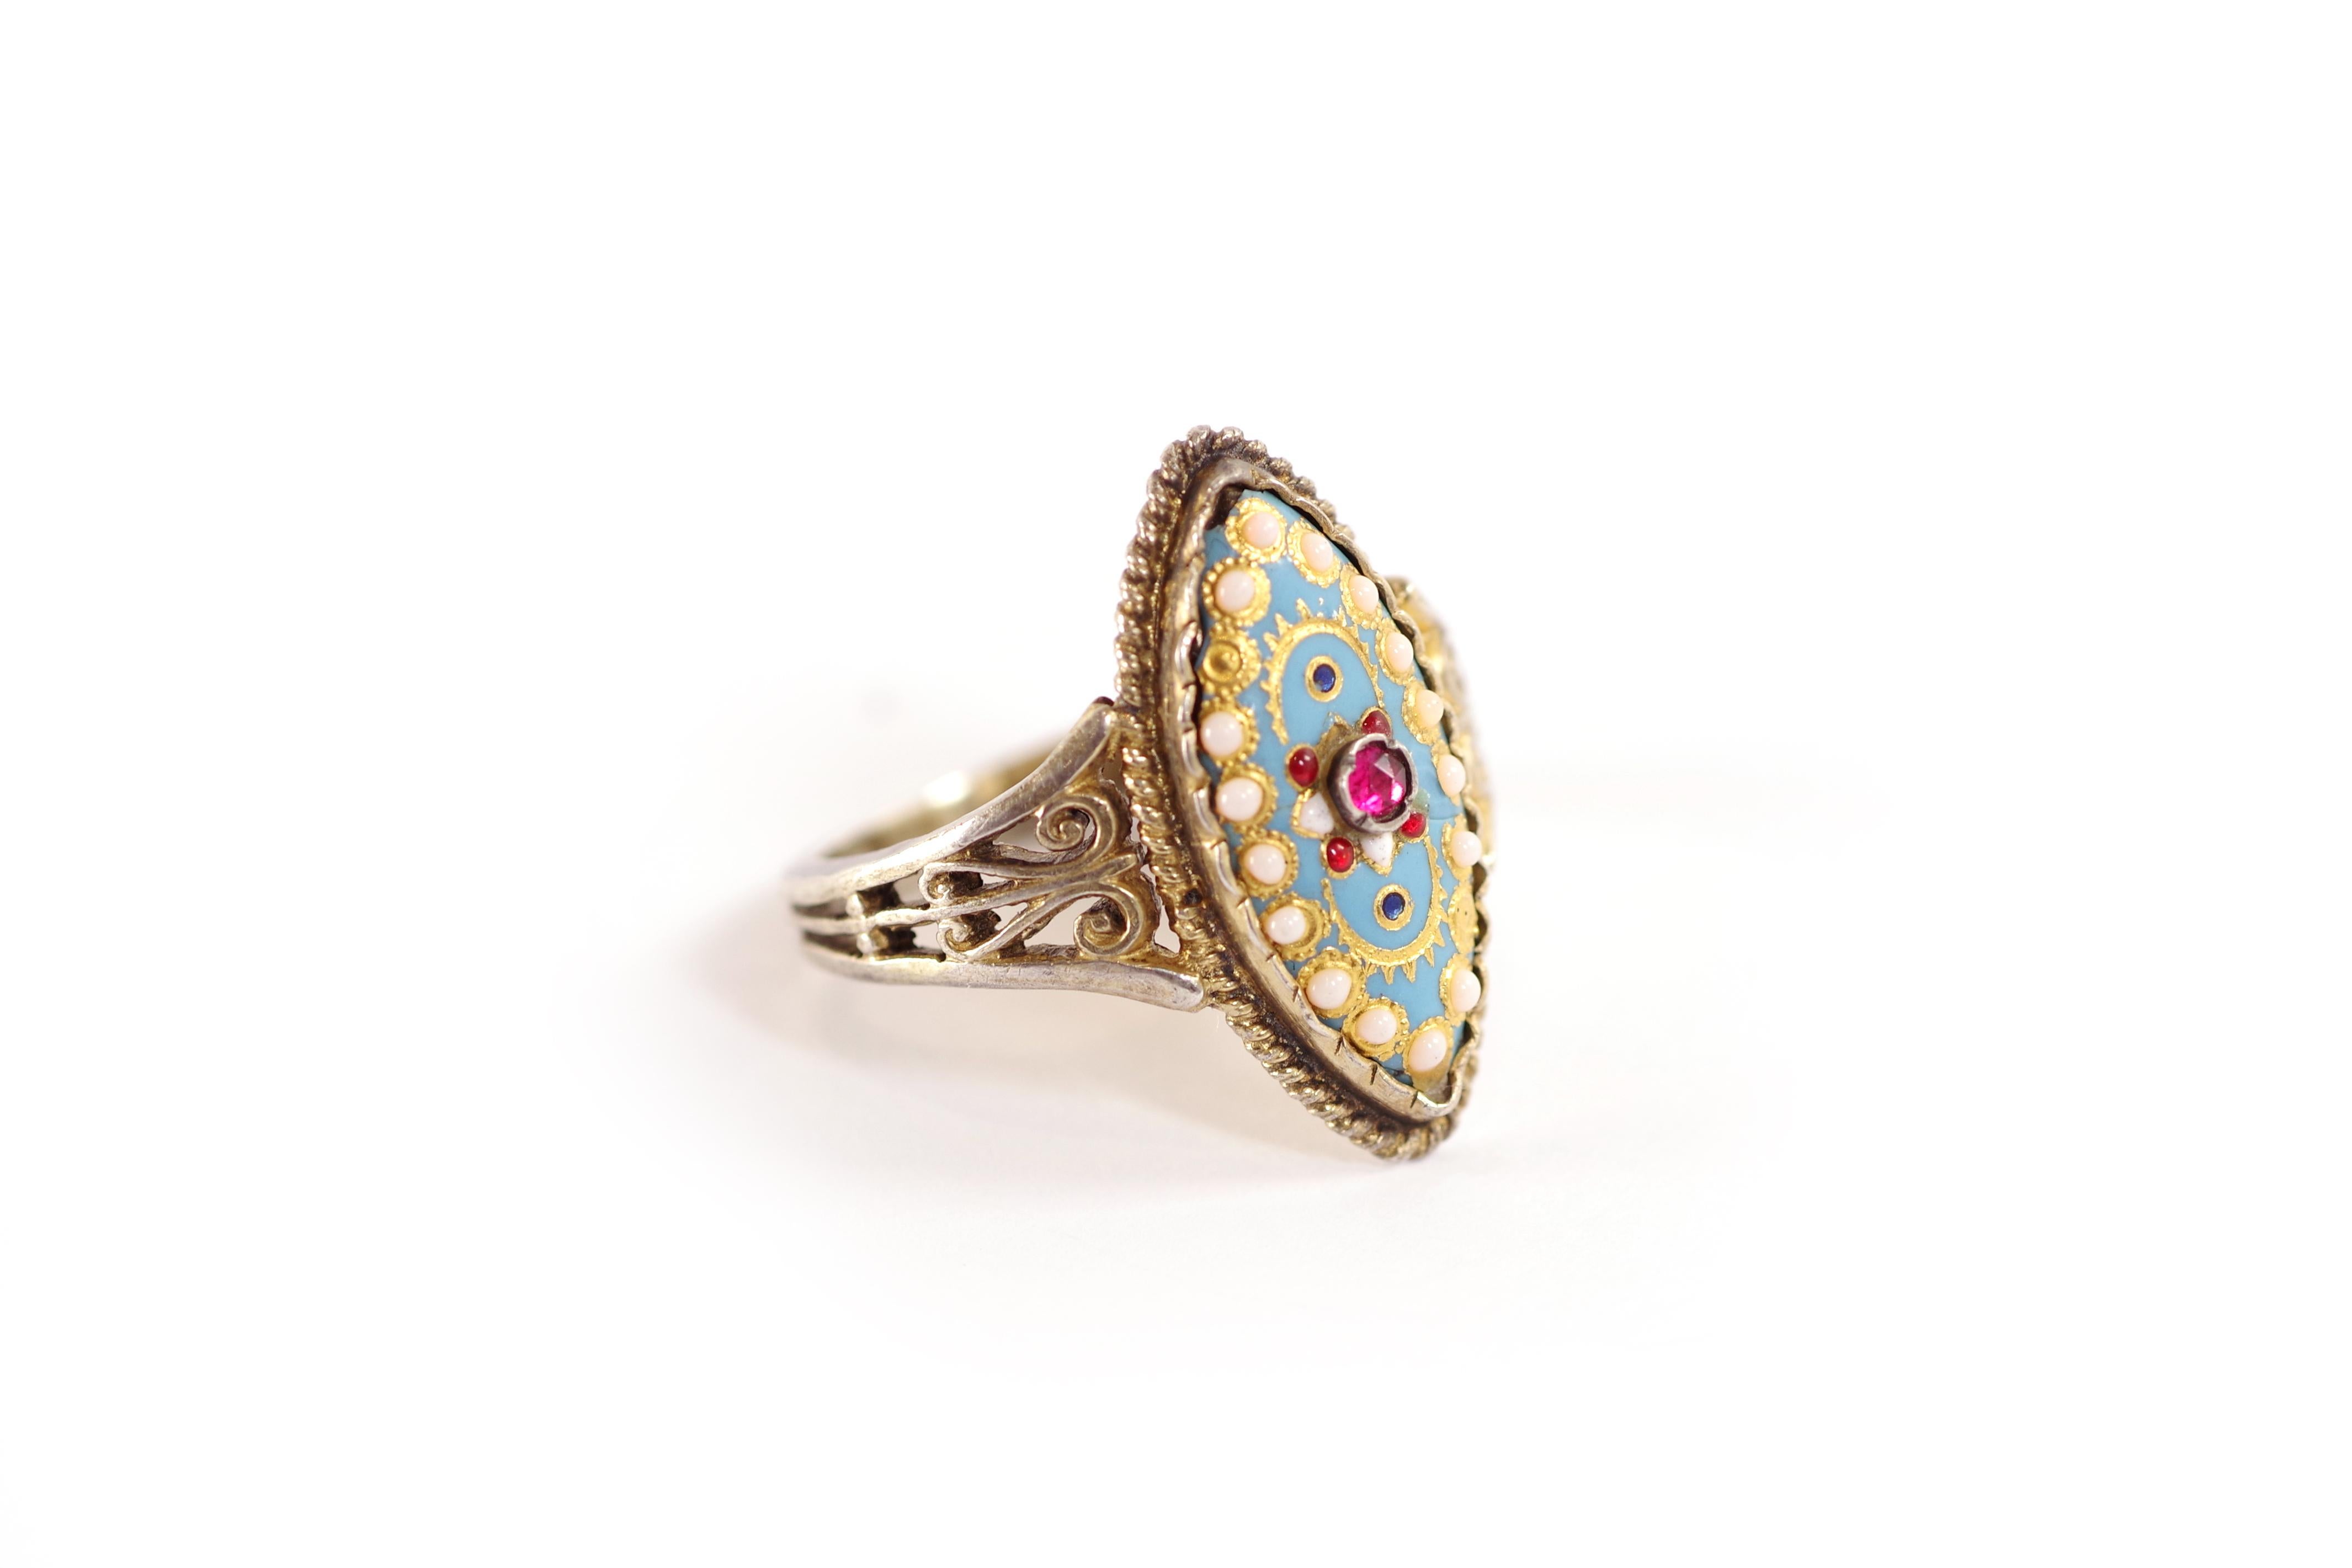 Antique Bressan enamel ring in vermeil. Regional marquise-style ring decorated with enamel. In the centre, a red rhinestone is surrounded by white enamel pearls circled in gold, on a sky-blue background. The ring is richly decorated and openwork.